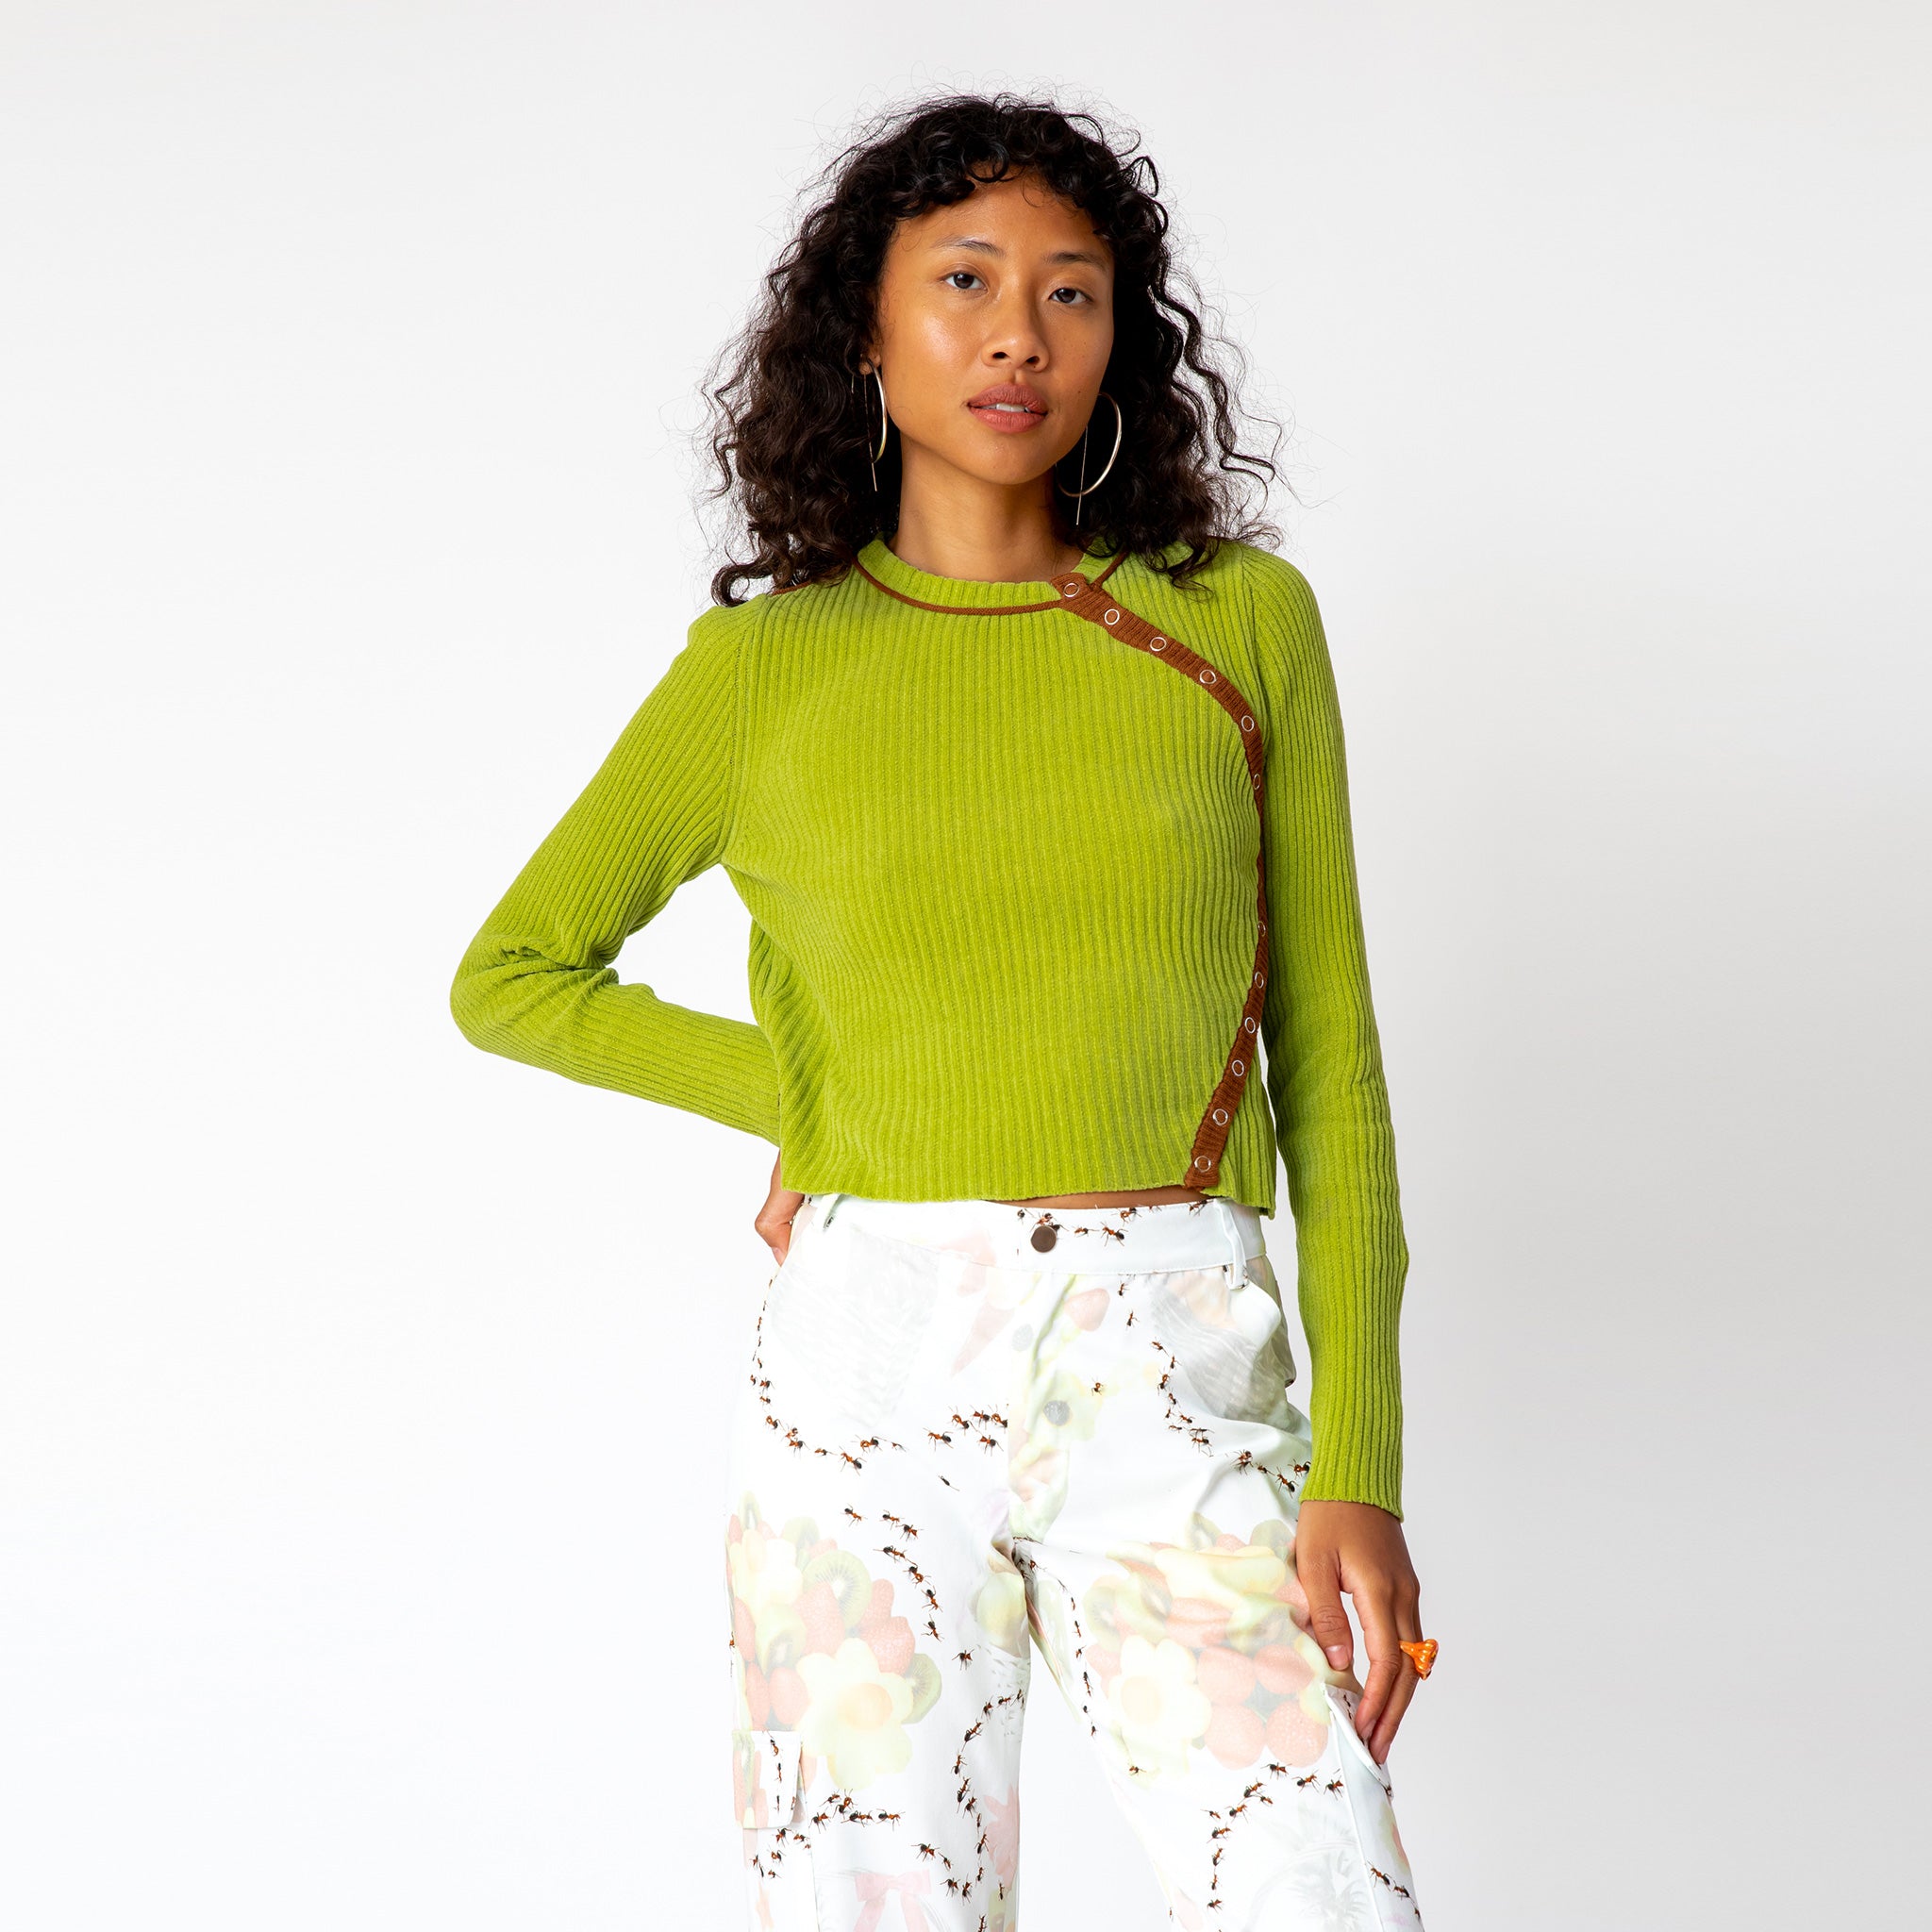 A model wears the ribbed lime green Angle Cardigan by Eckhaus Latta featuring buttons that flow in a curved line along the left side of the chest.